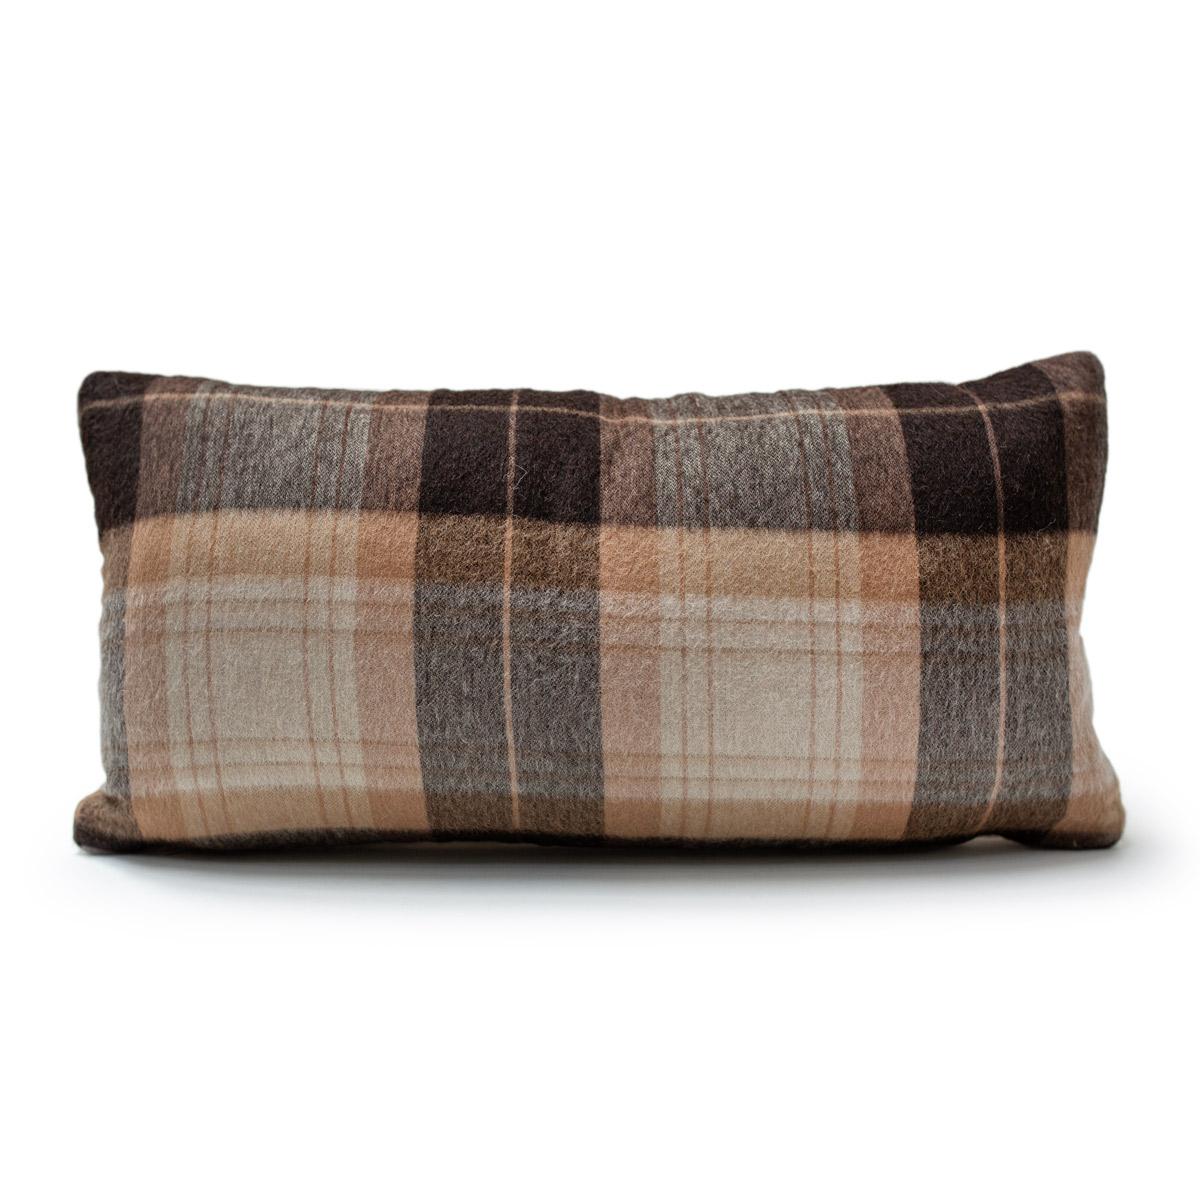 Pillow front in hand-painted, Tahoe with Cream felted wool fabric by JG SWITZER, backed with Sandra Jordan Prima Alpaca in Plaid Espresso Camel.

Pillow comes with a hidden zipper enclosure and ships with an insert. This is Dry Clean Only.